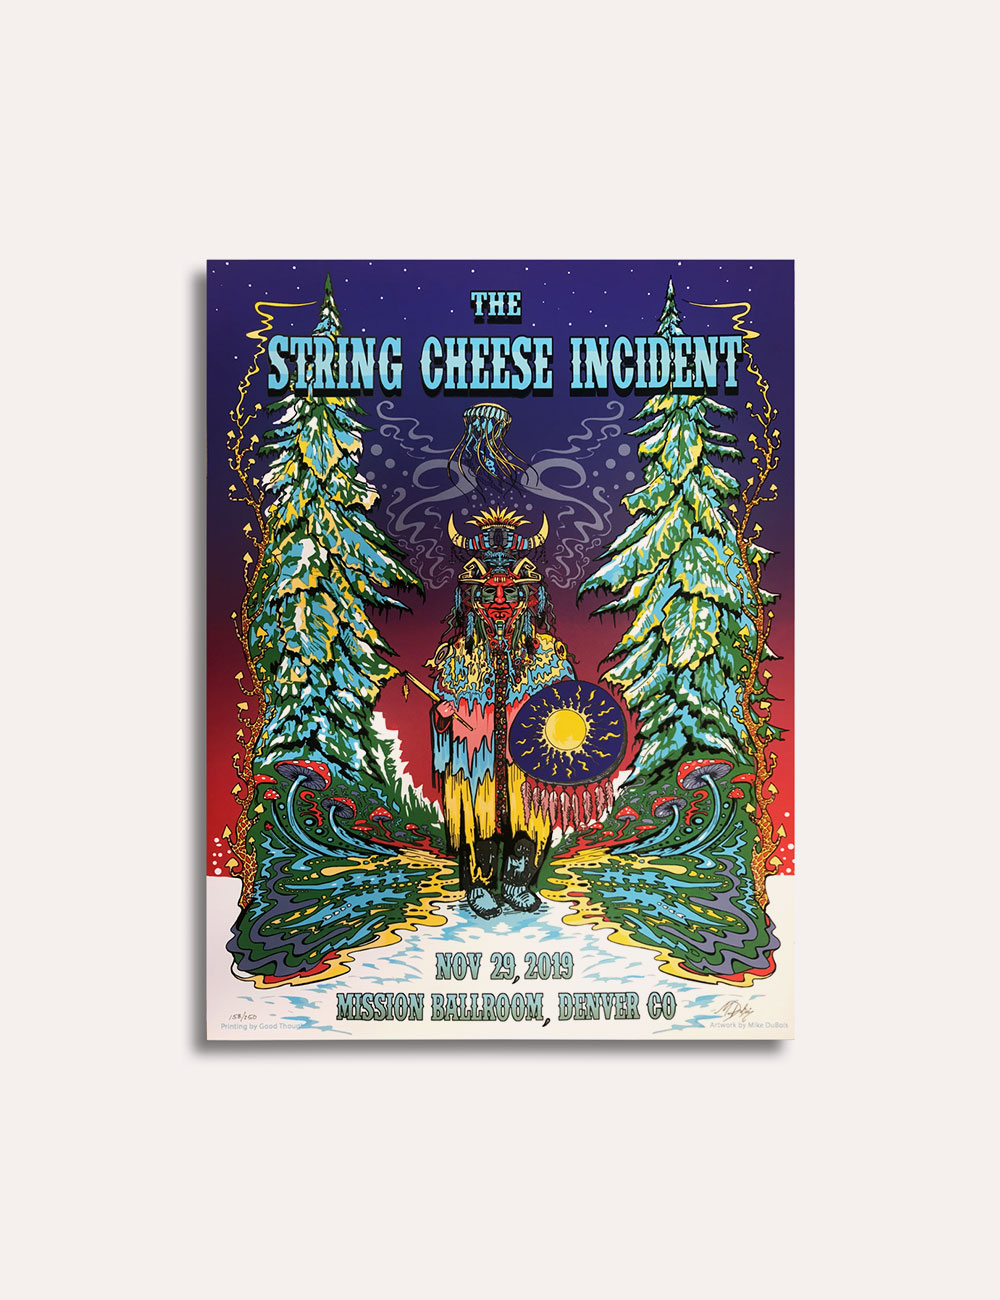 The String Cheese Incident - Merch - Poster - 2019 Mission Ballroom - Denver - November 29th